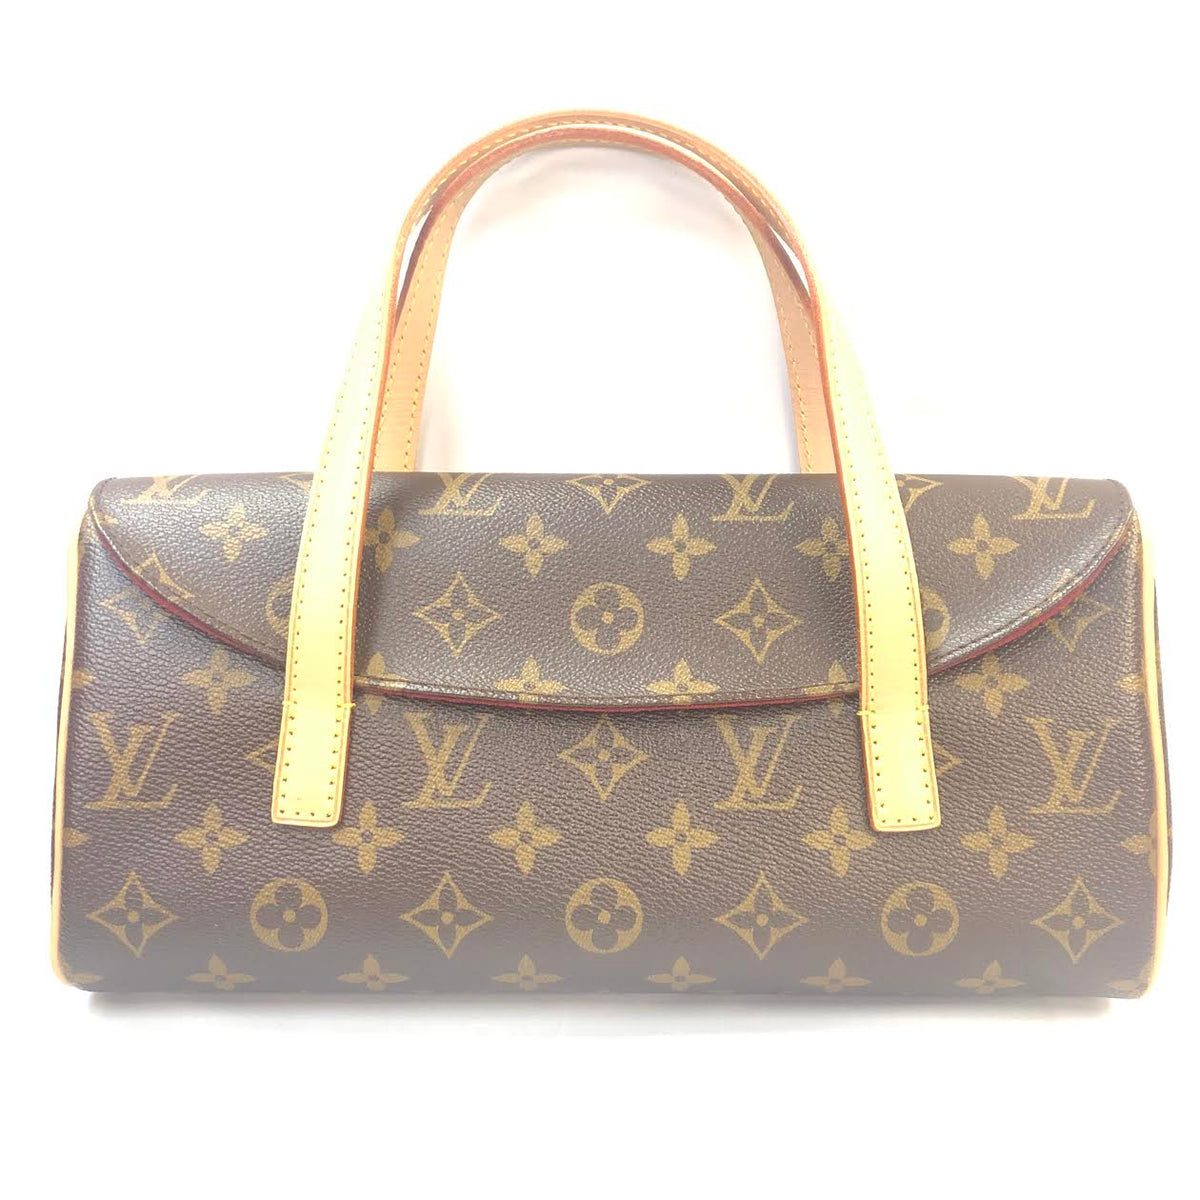 Louis Vuitton shell monogram top handle bag 🐚 🧜‍♀️ From